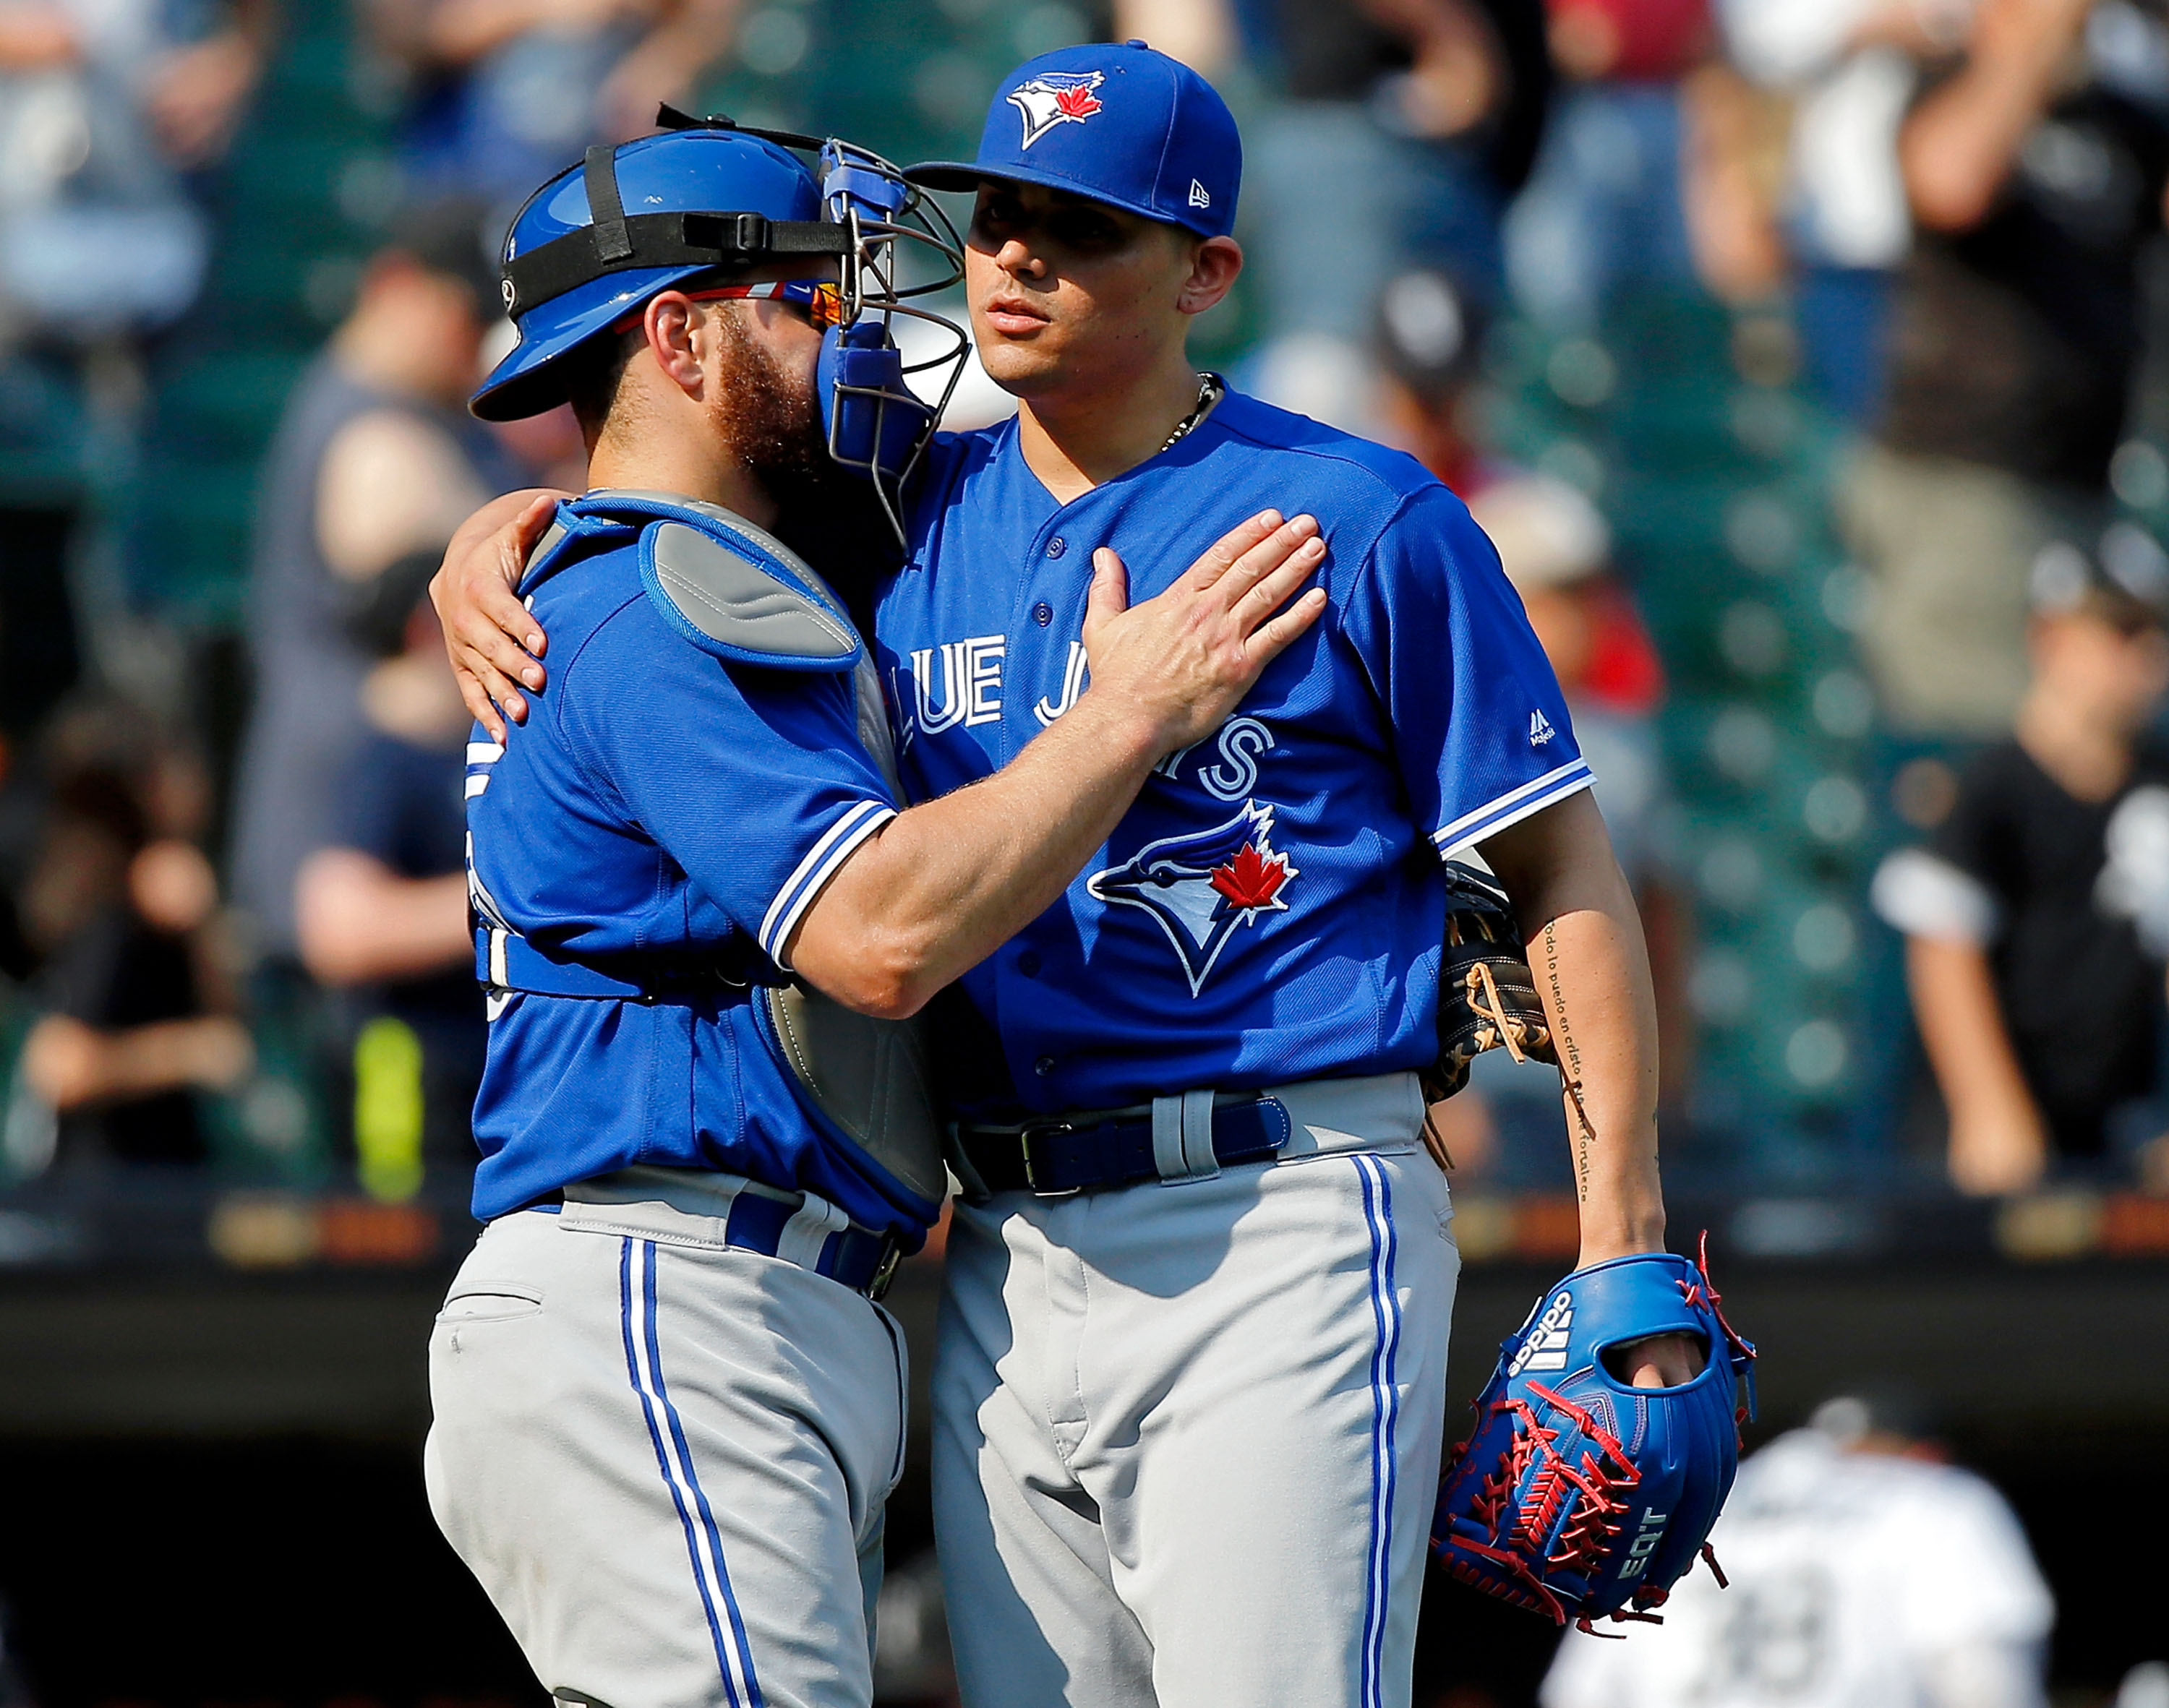 Toronto Blue Jays: Time to invest in a backup catcher